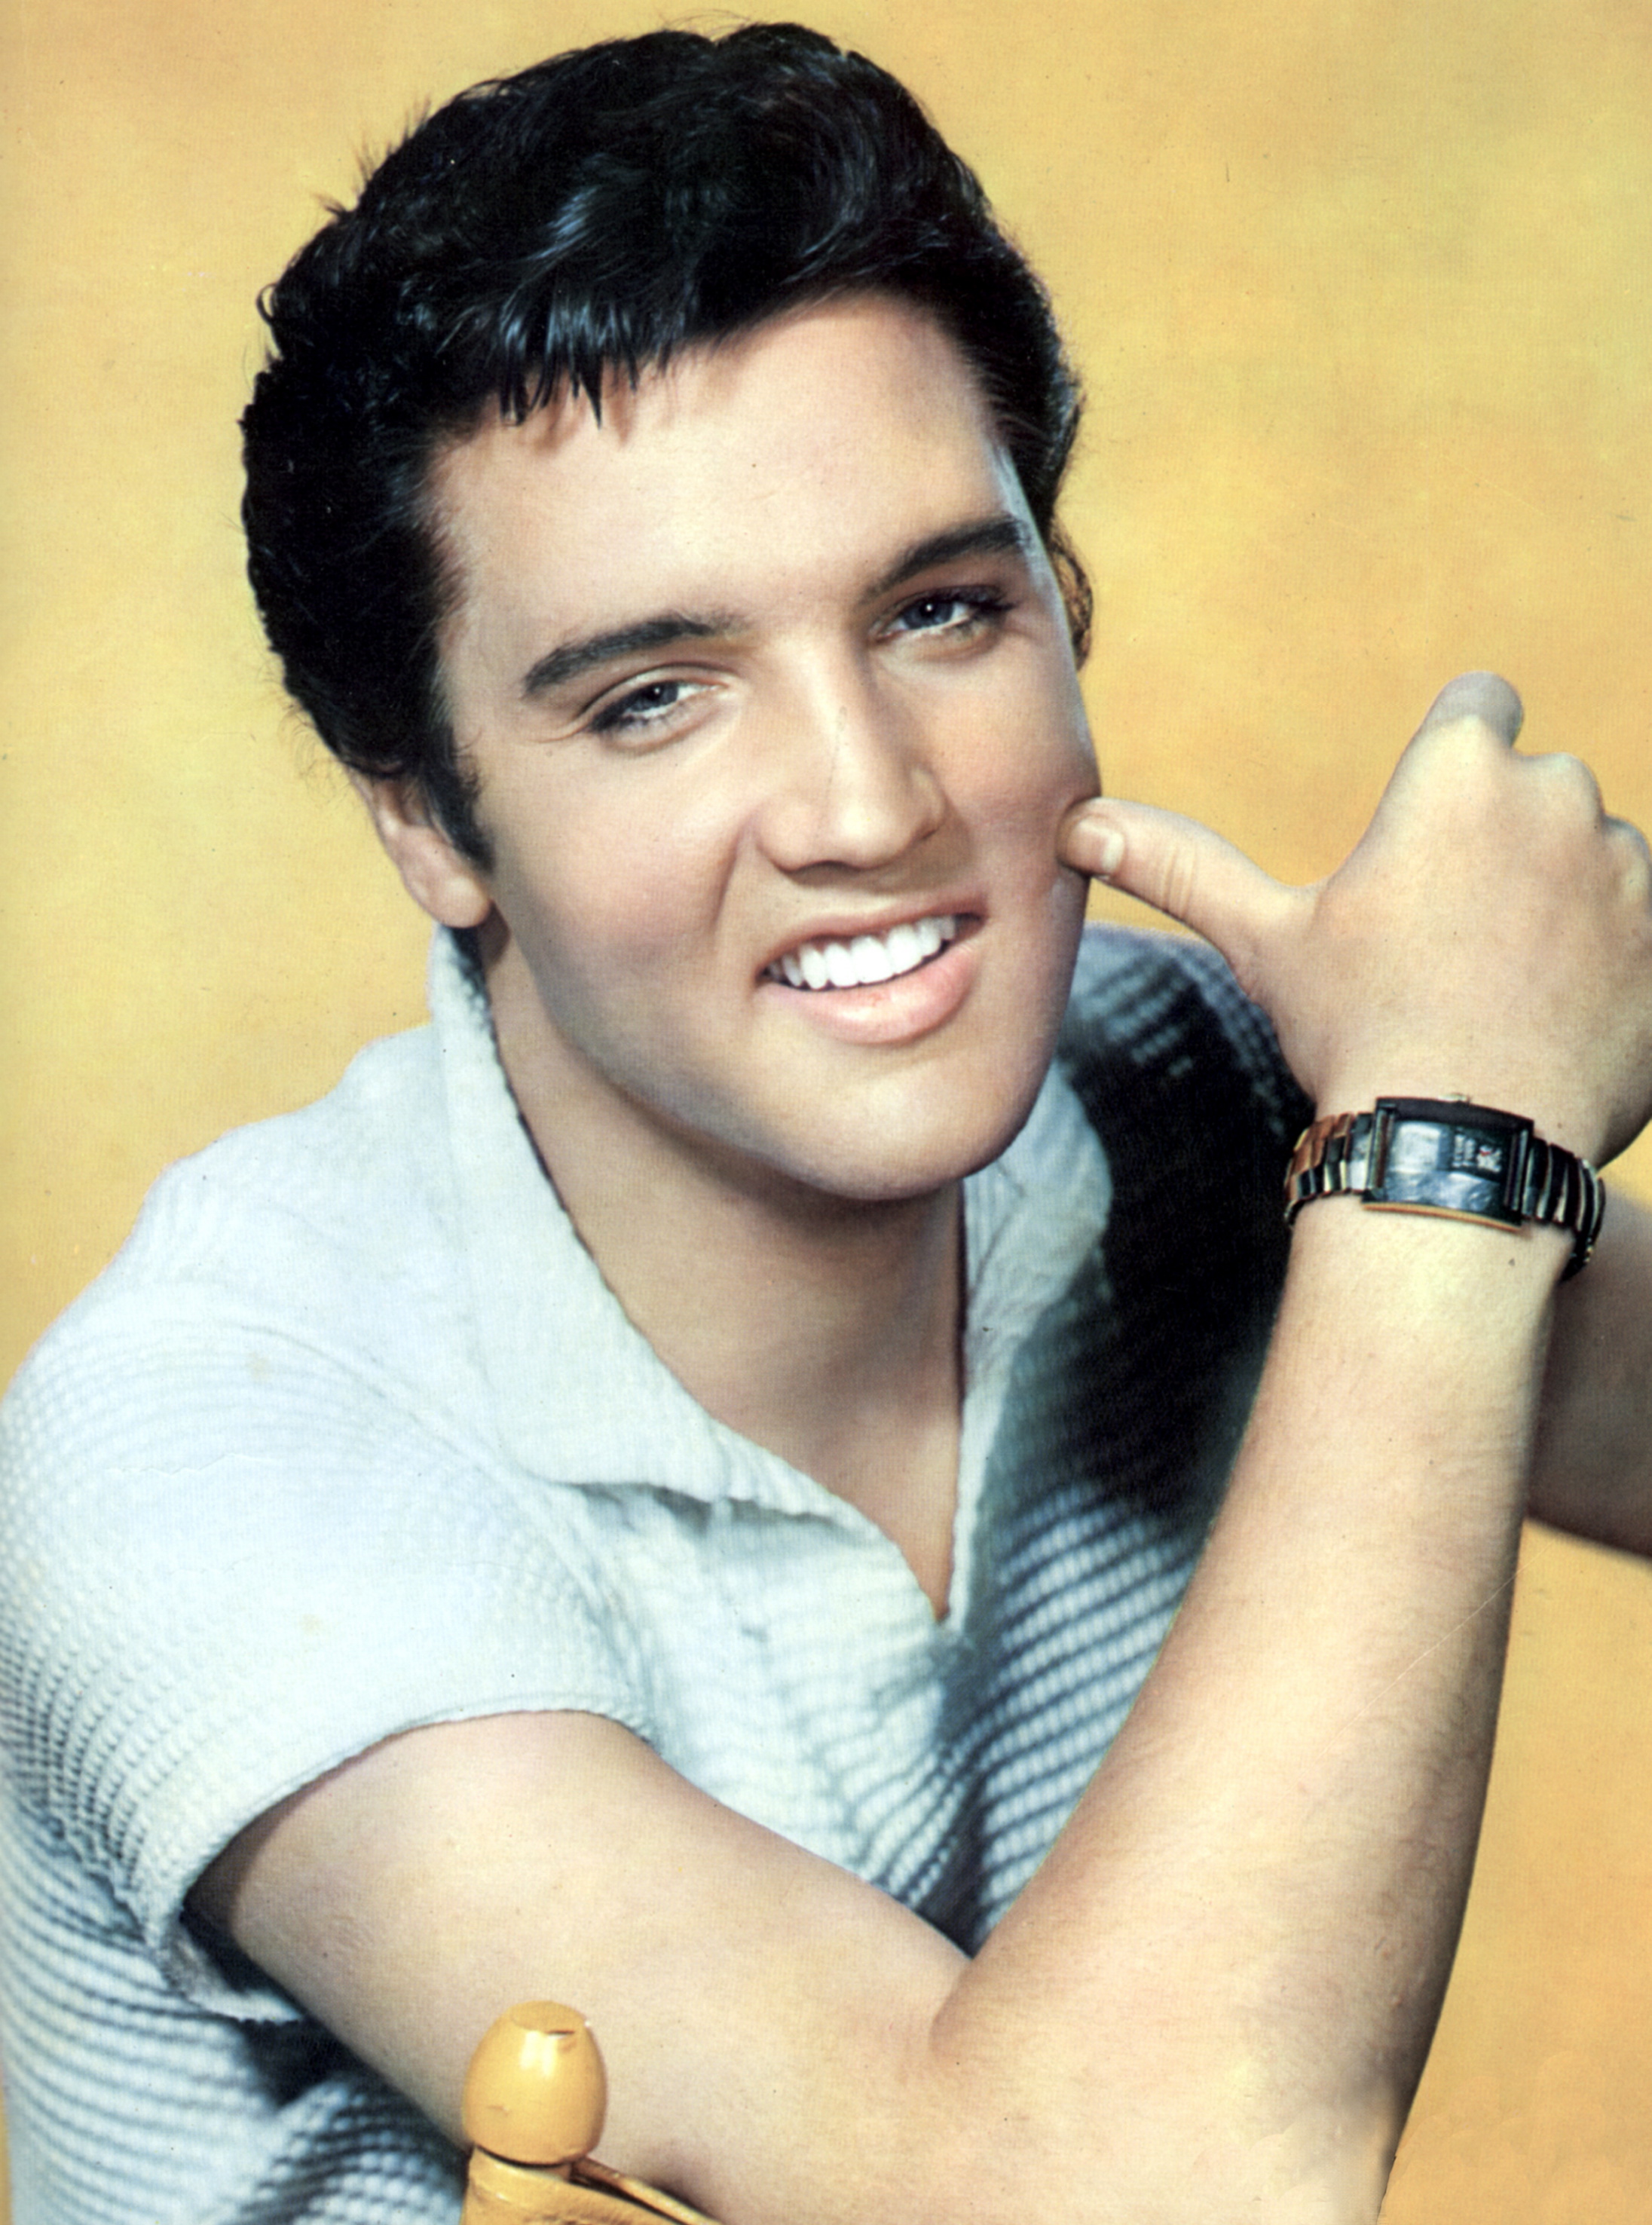 7 Fascinating Facts About Elvis Presley